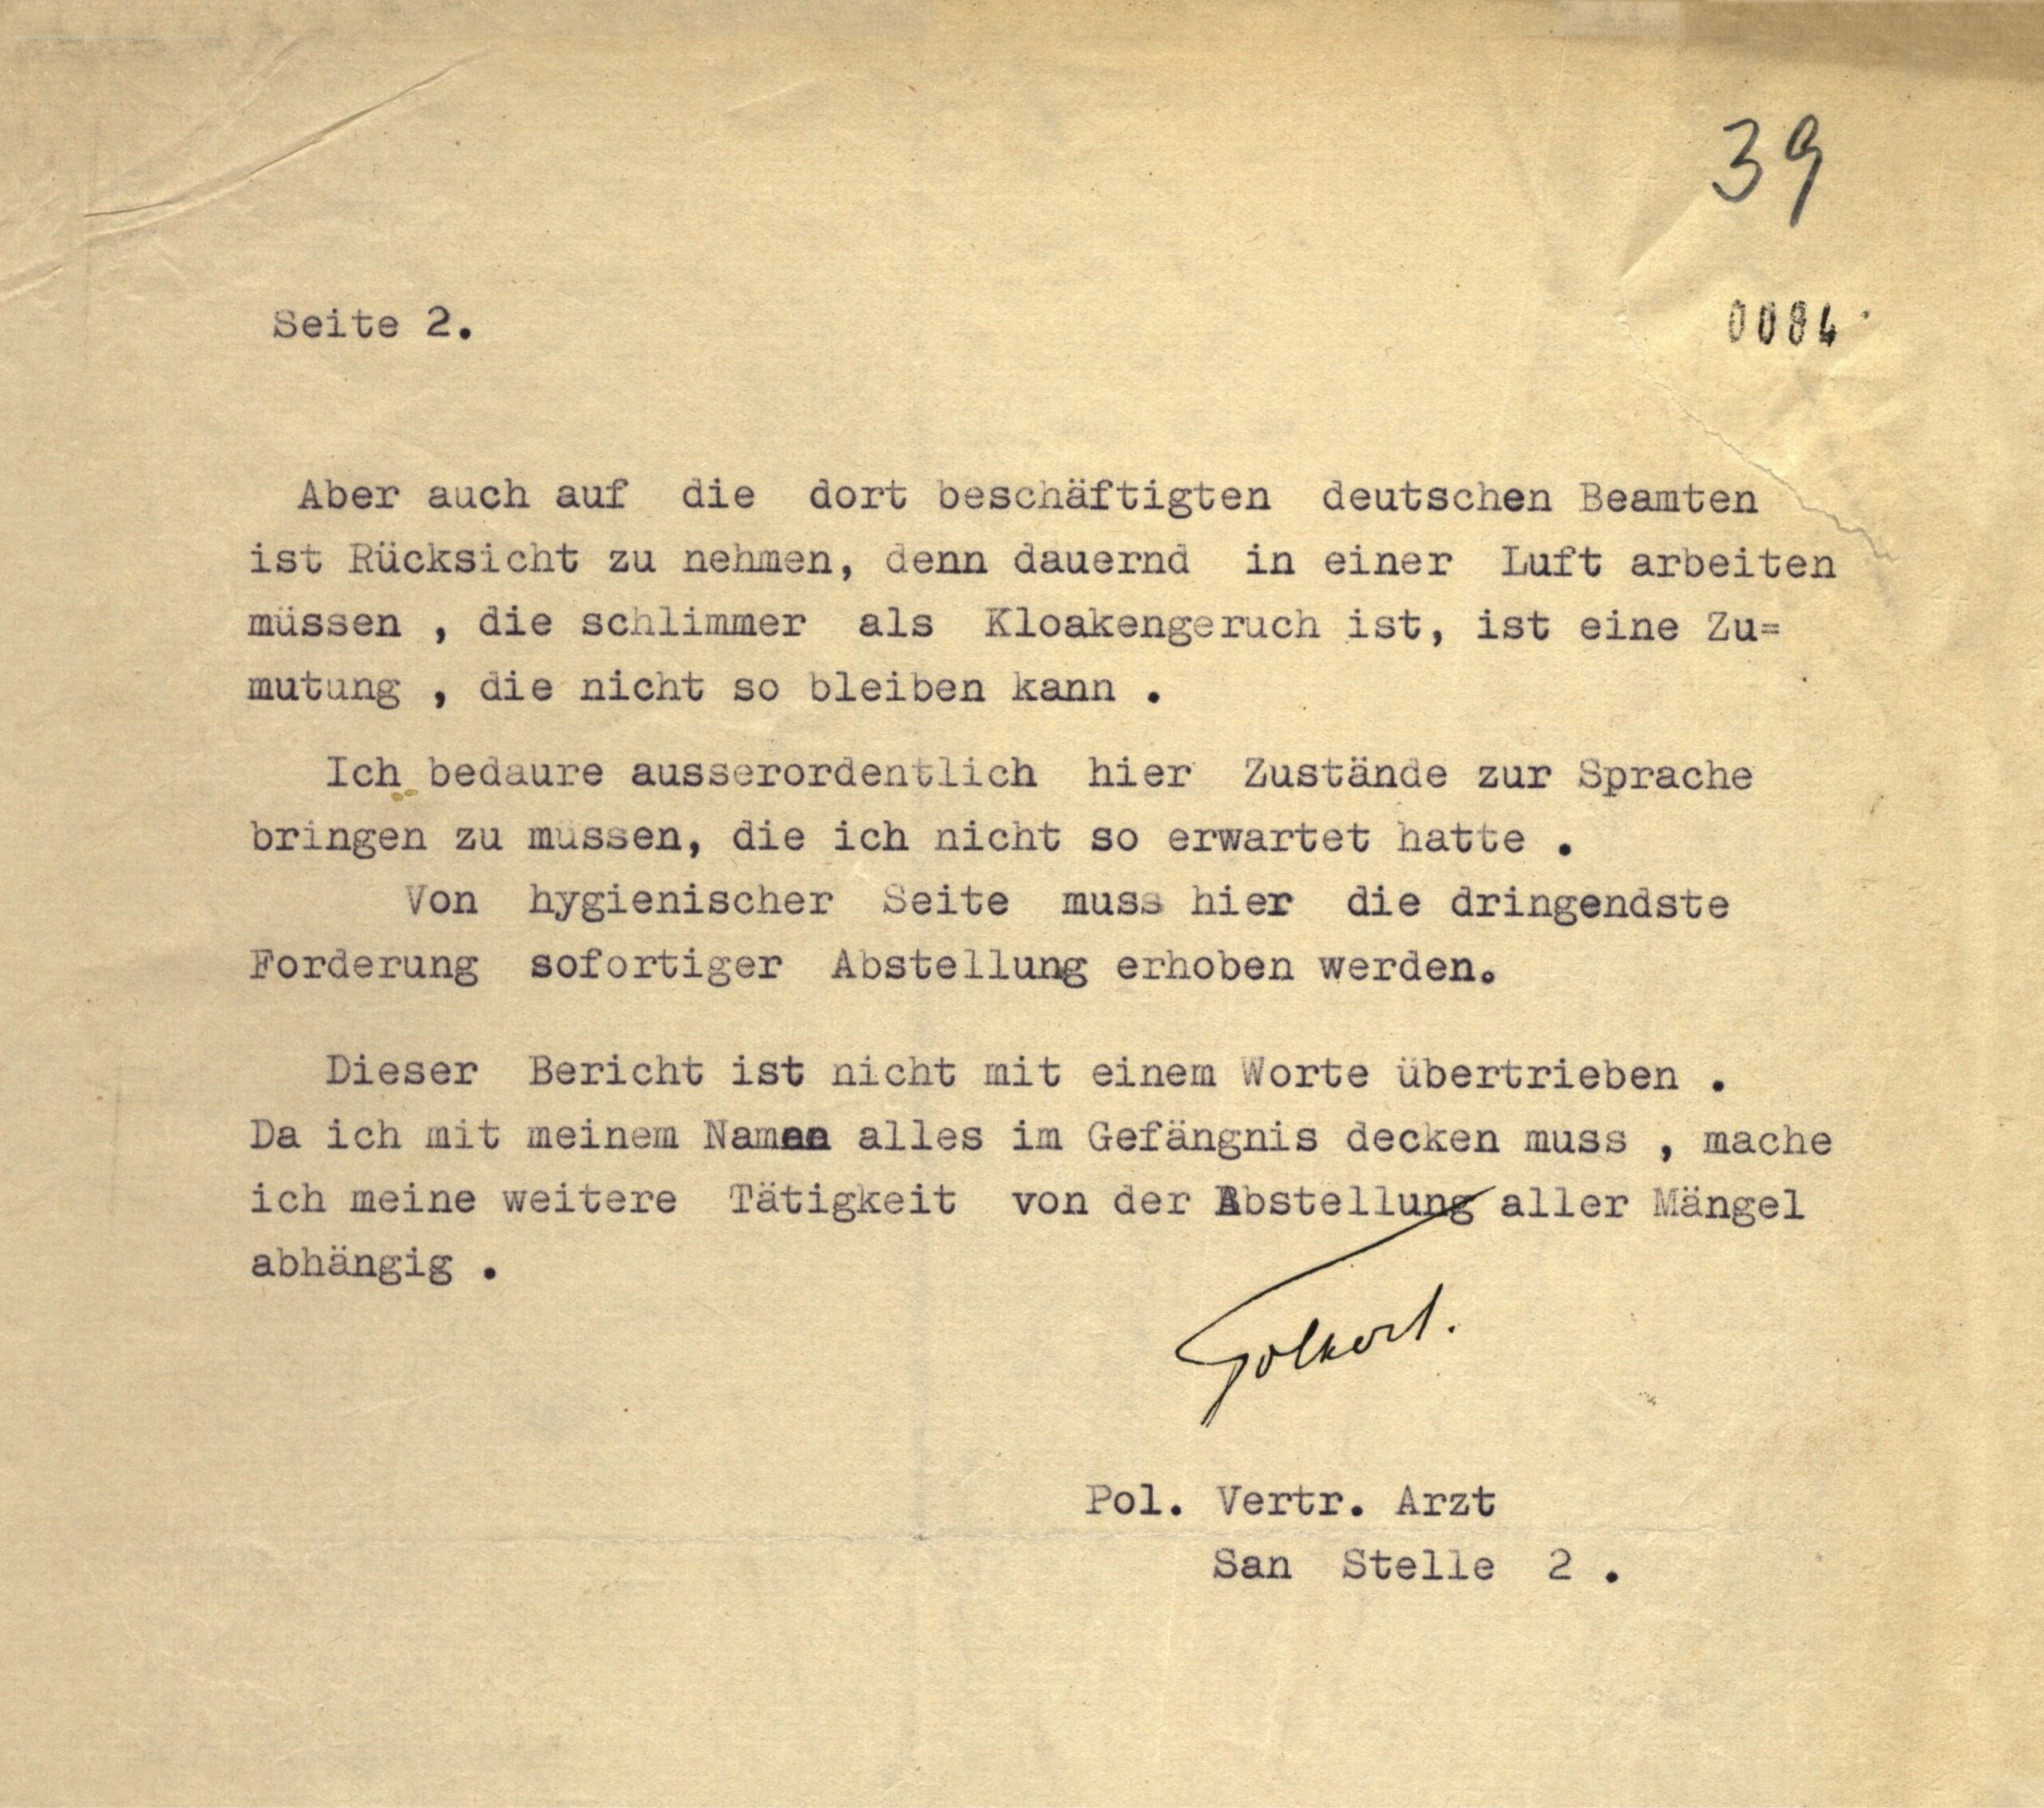 Letter to the senior police doctor in Frankfurt am Main dated 22 January 1944 – Page 2